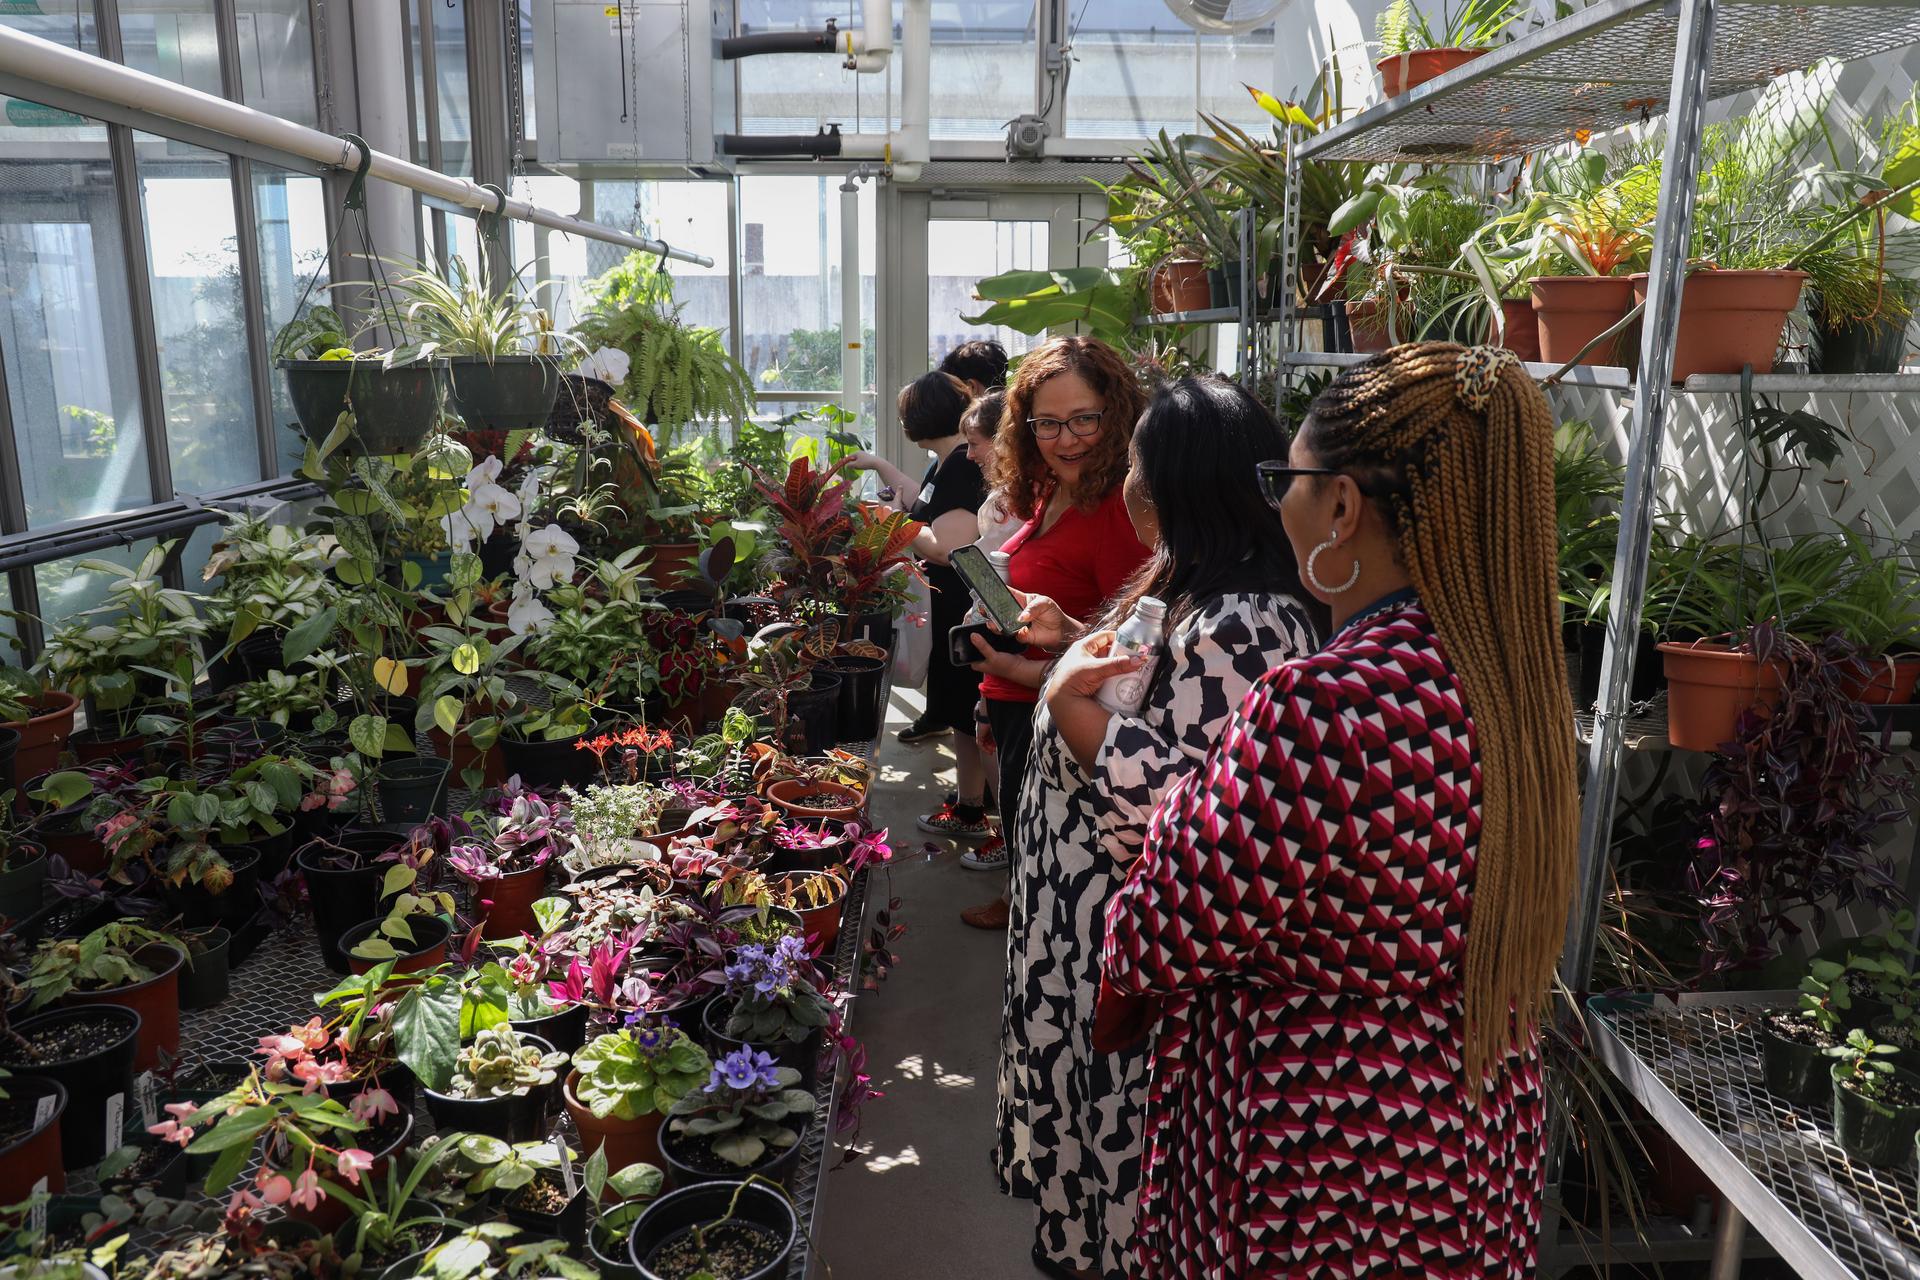 GW's Harlan Greenhouse was among the Science and Engineering Hall locations open for tours at last week's Research Showcase. (Lily Speredelozzi/GW Today)